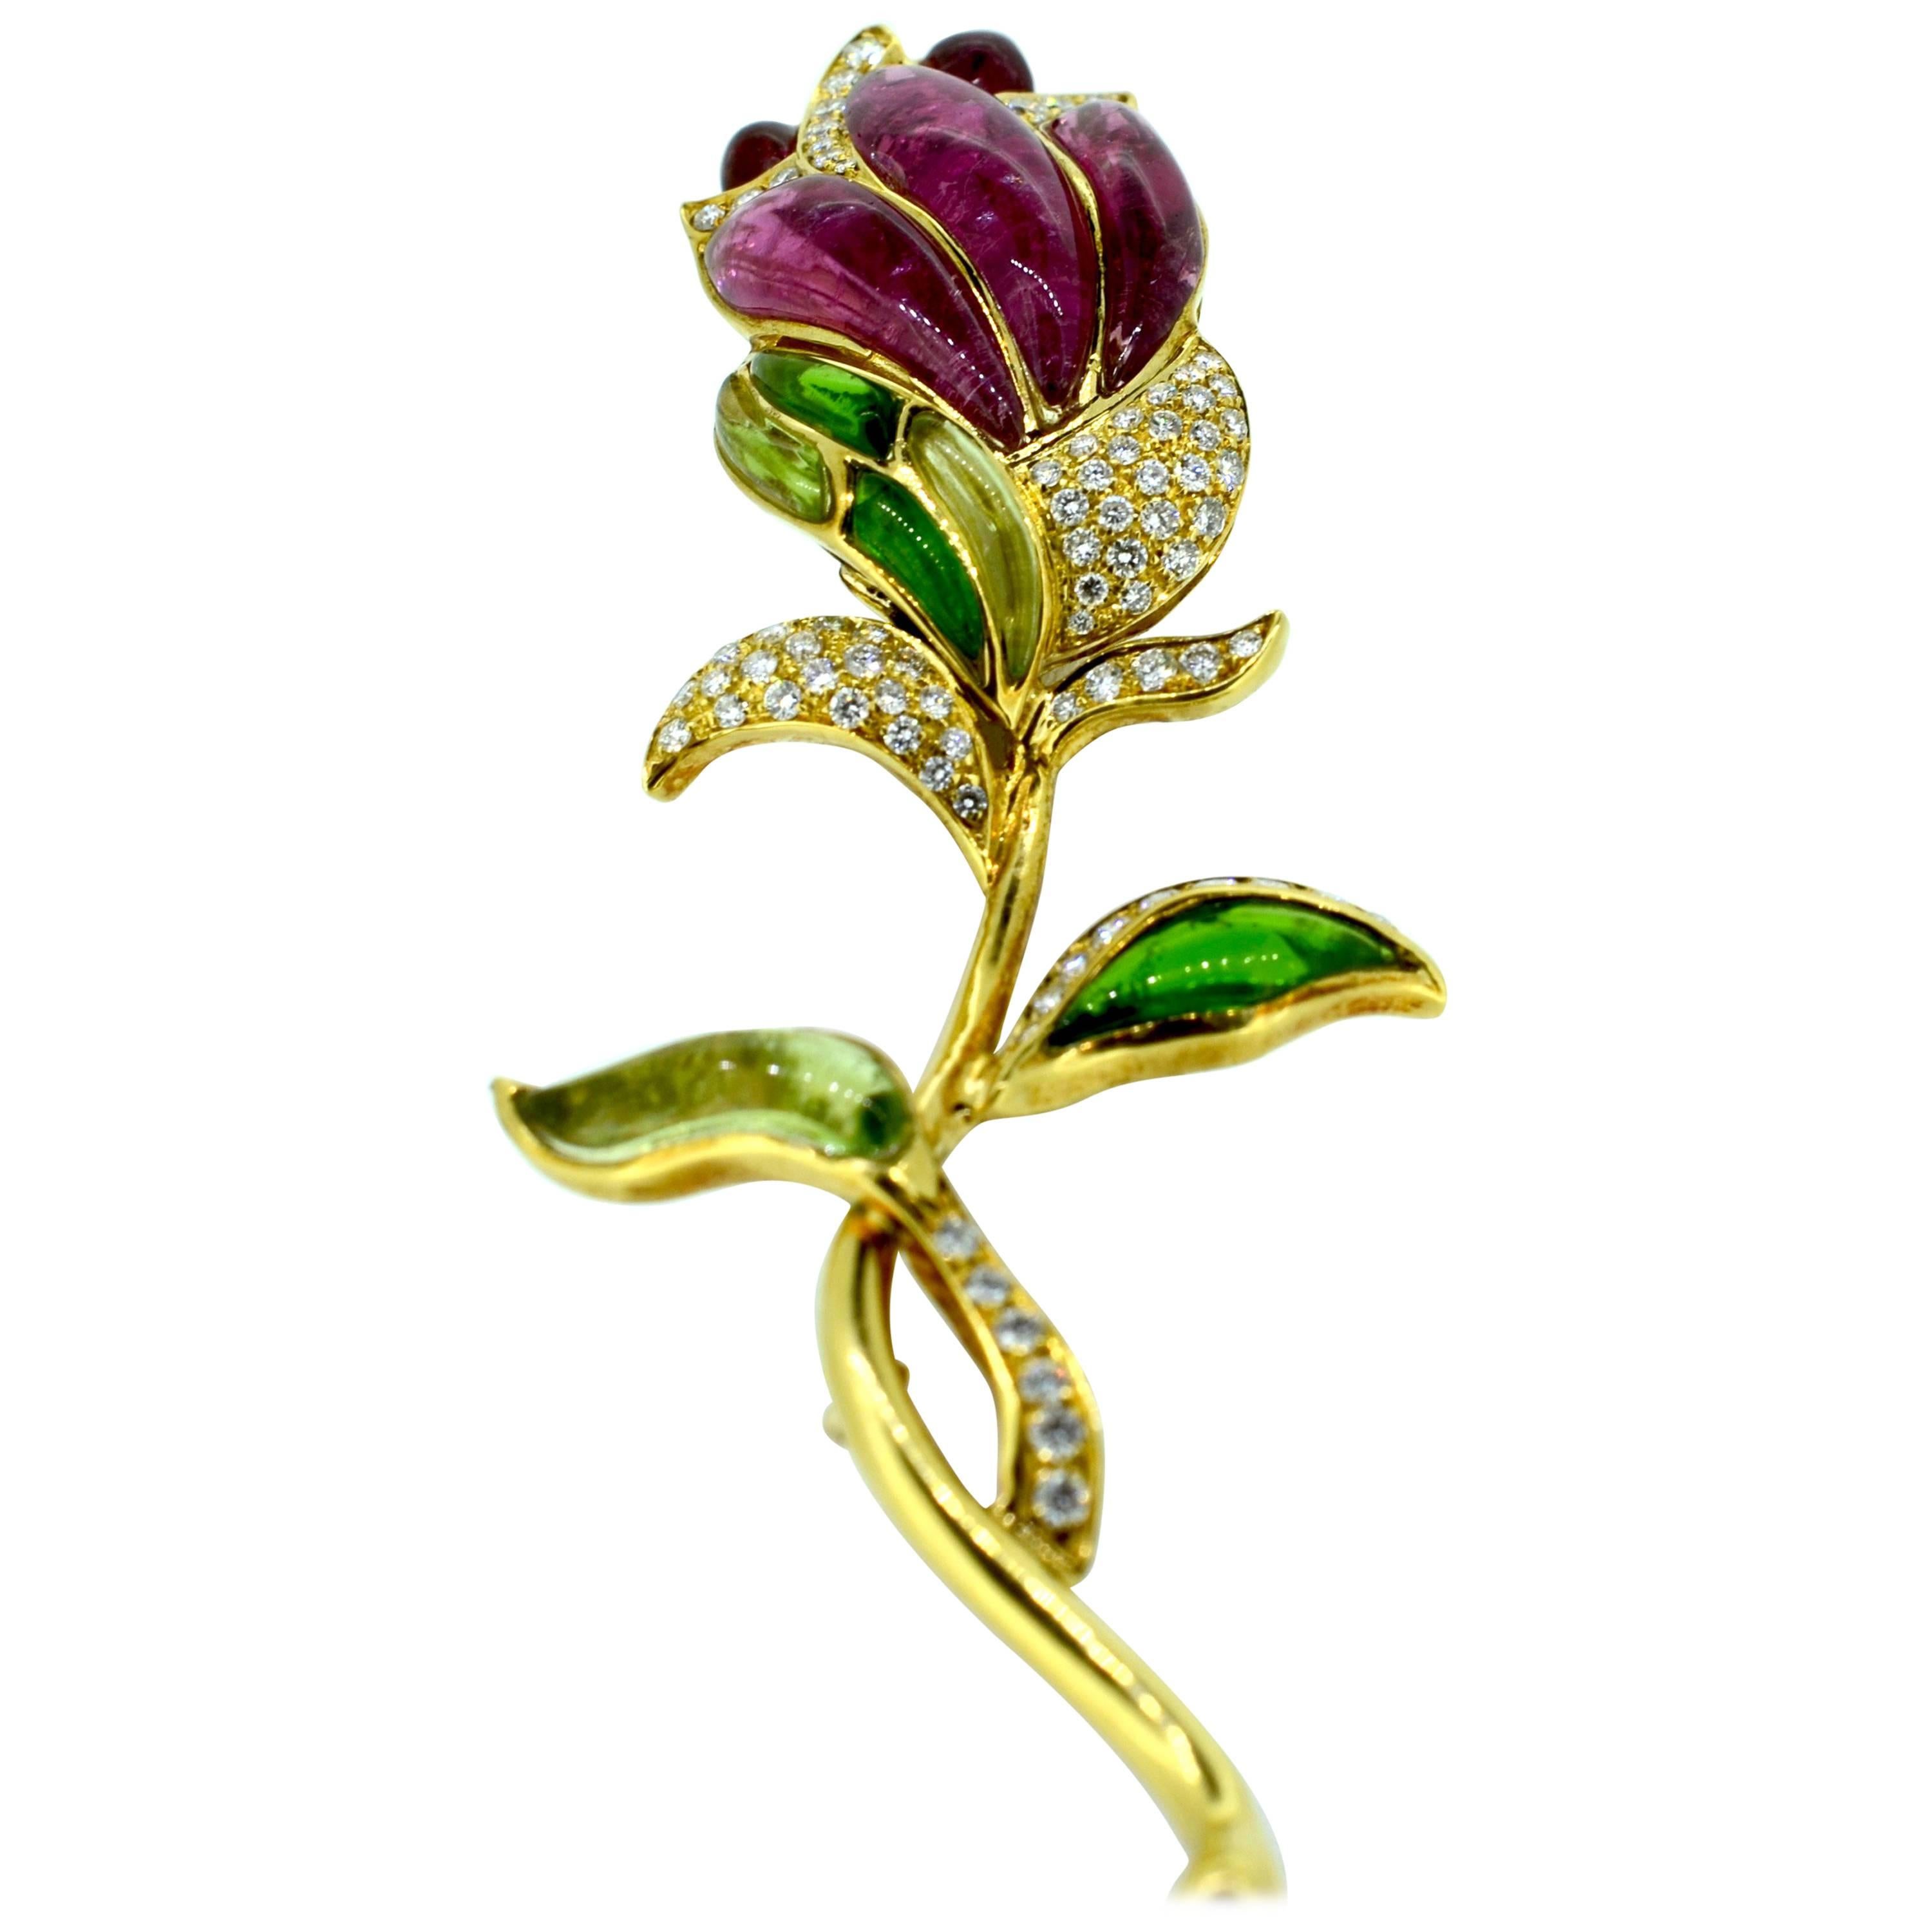 Gorgeous Gemstone Brooch For Sale